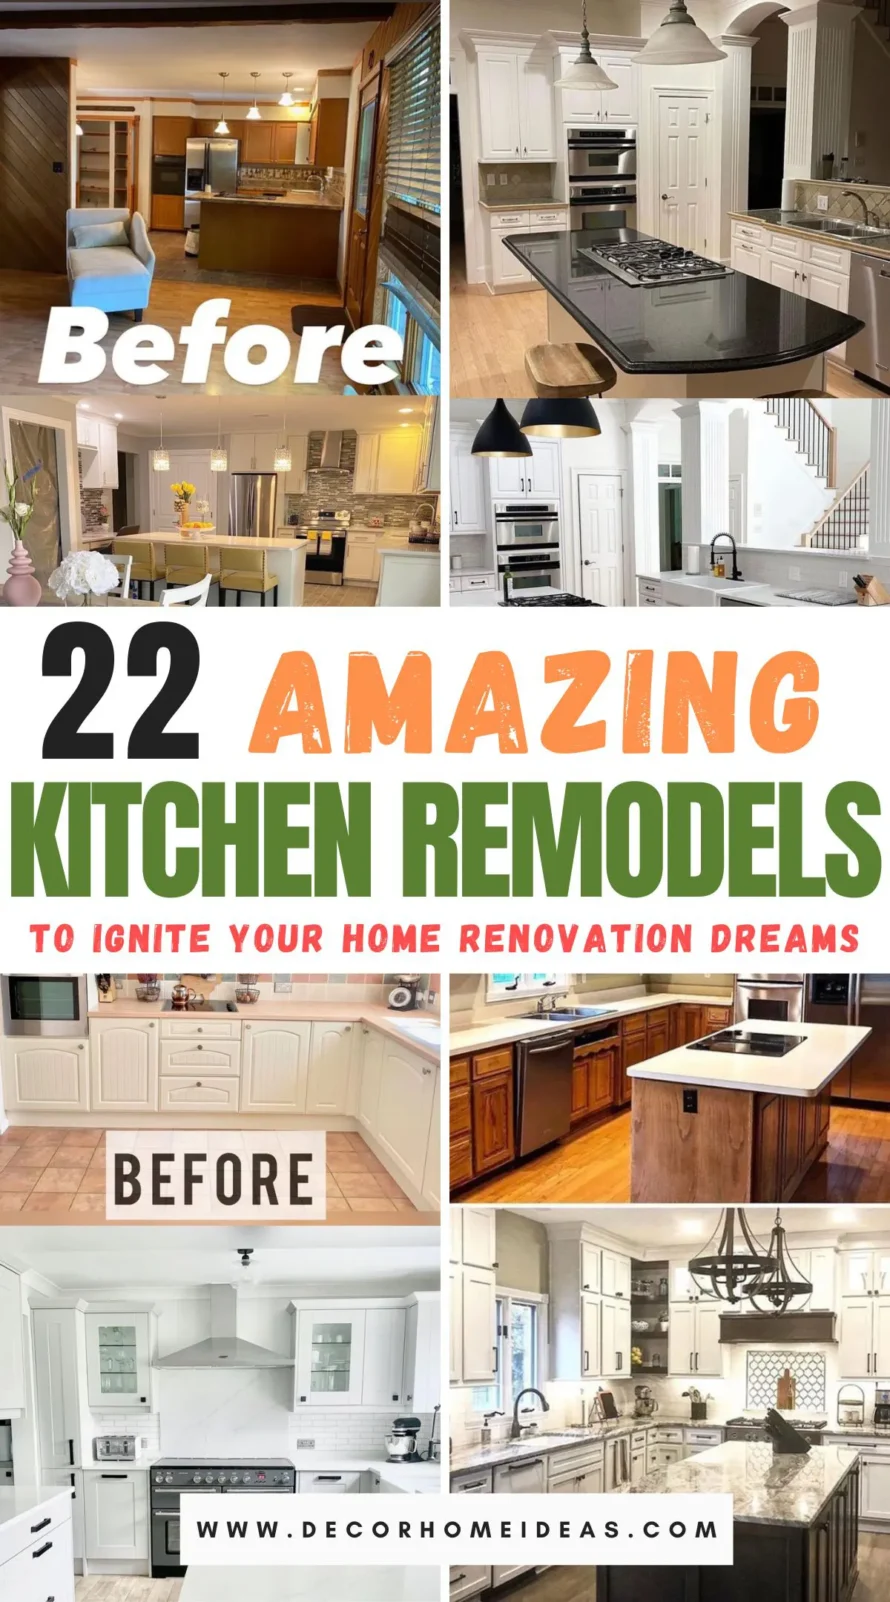 Discover 22 stunning kitchen makeovers that will inspire your next home renovation. From small tweaks to major overhauls, see how these transformations bring new life to old spaces. Dive in and ignite your imagination!